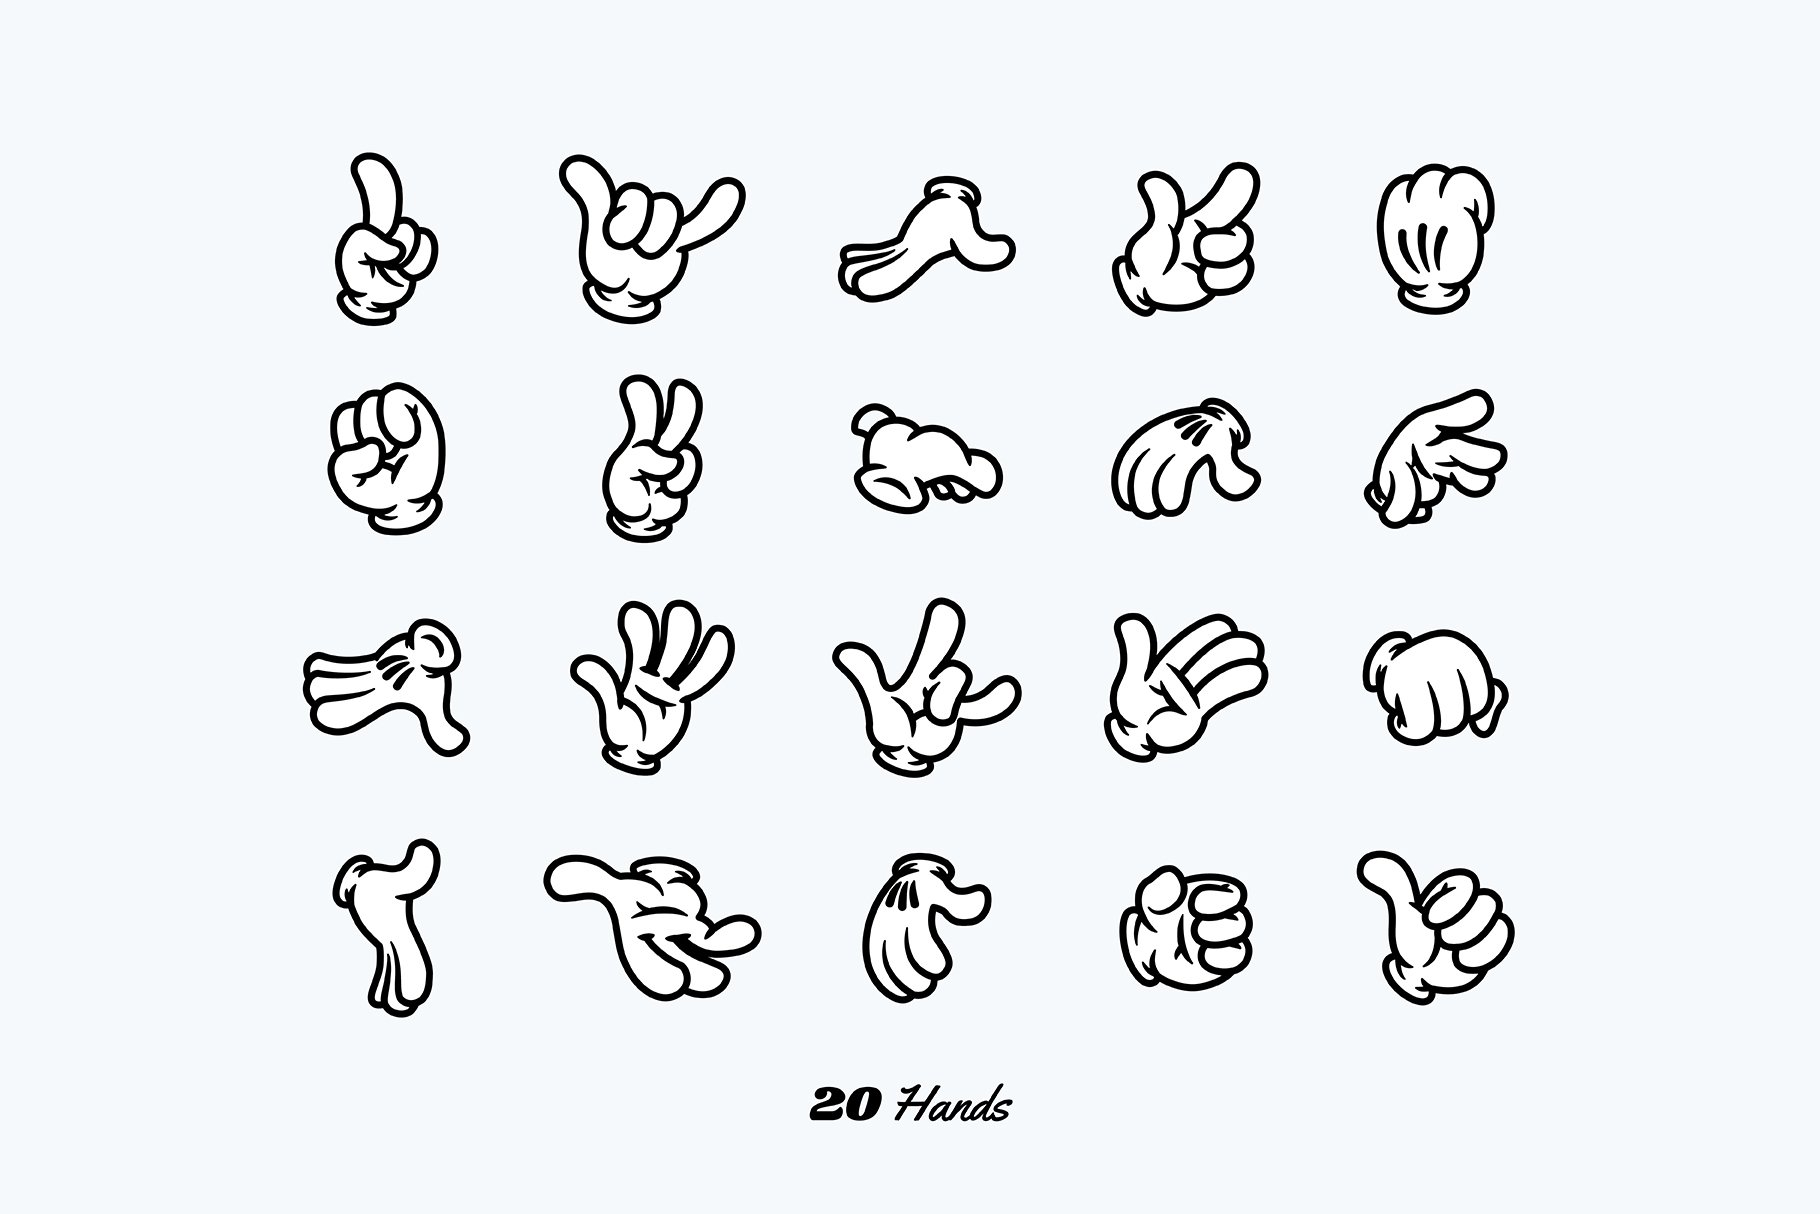 Hands collection.